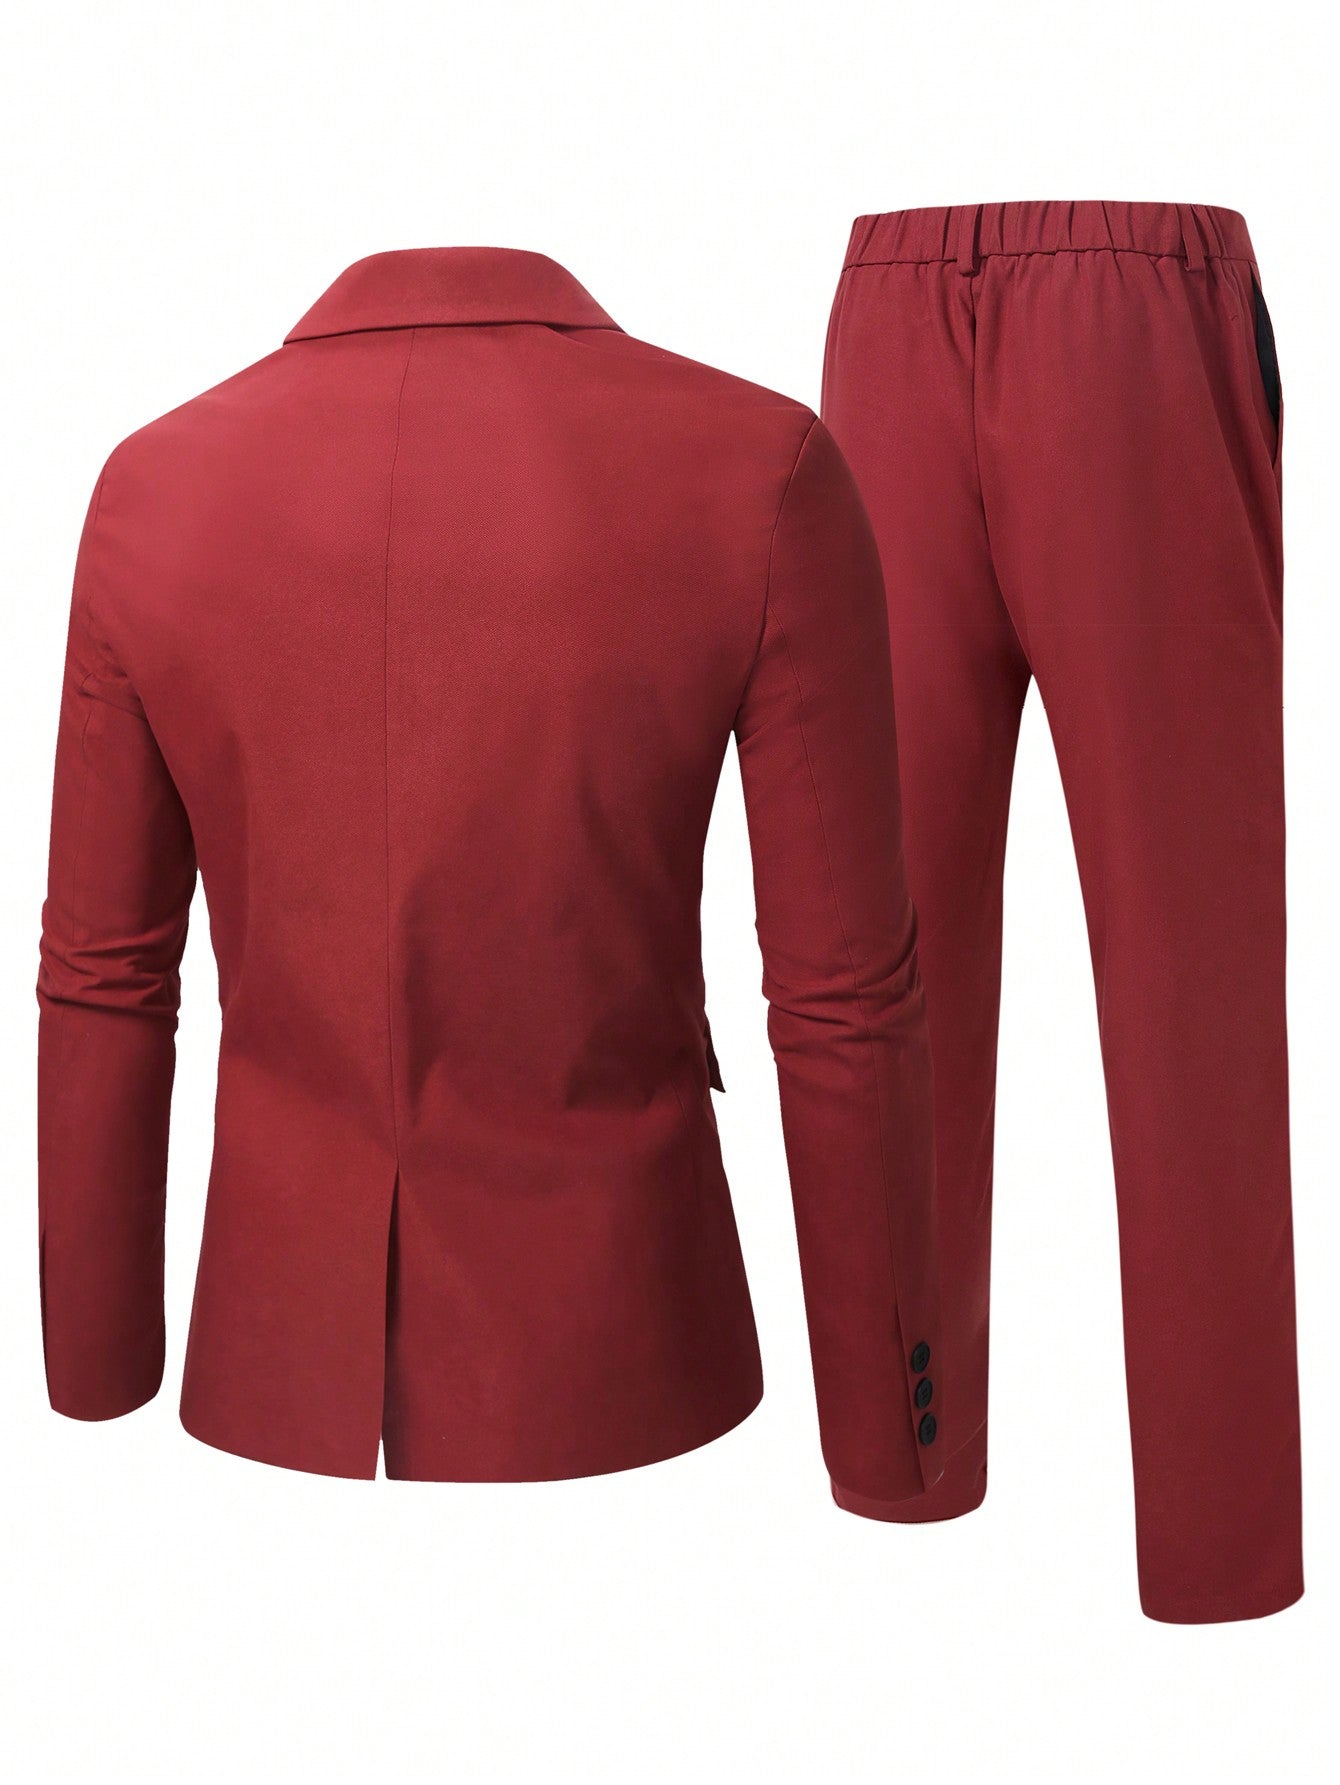 Manfinity Mode Men's Double-breasted Blazer And Pants Set